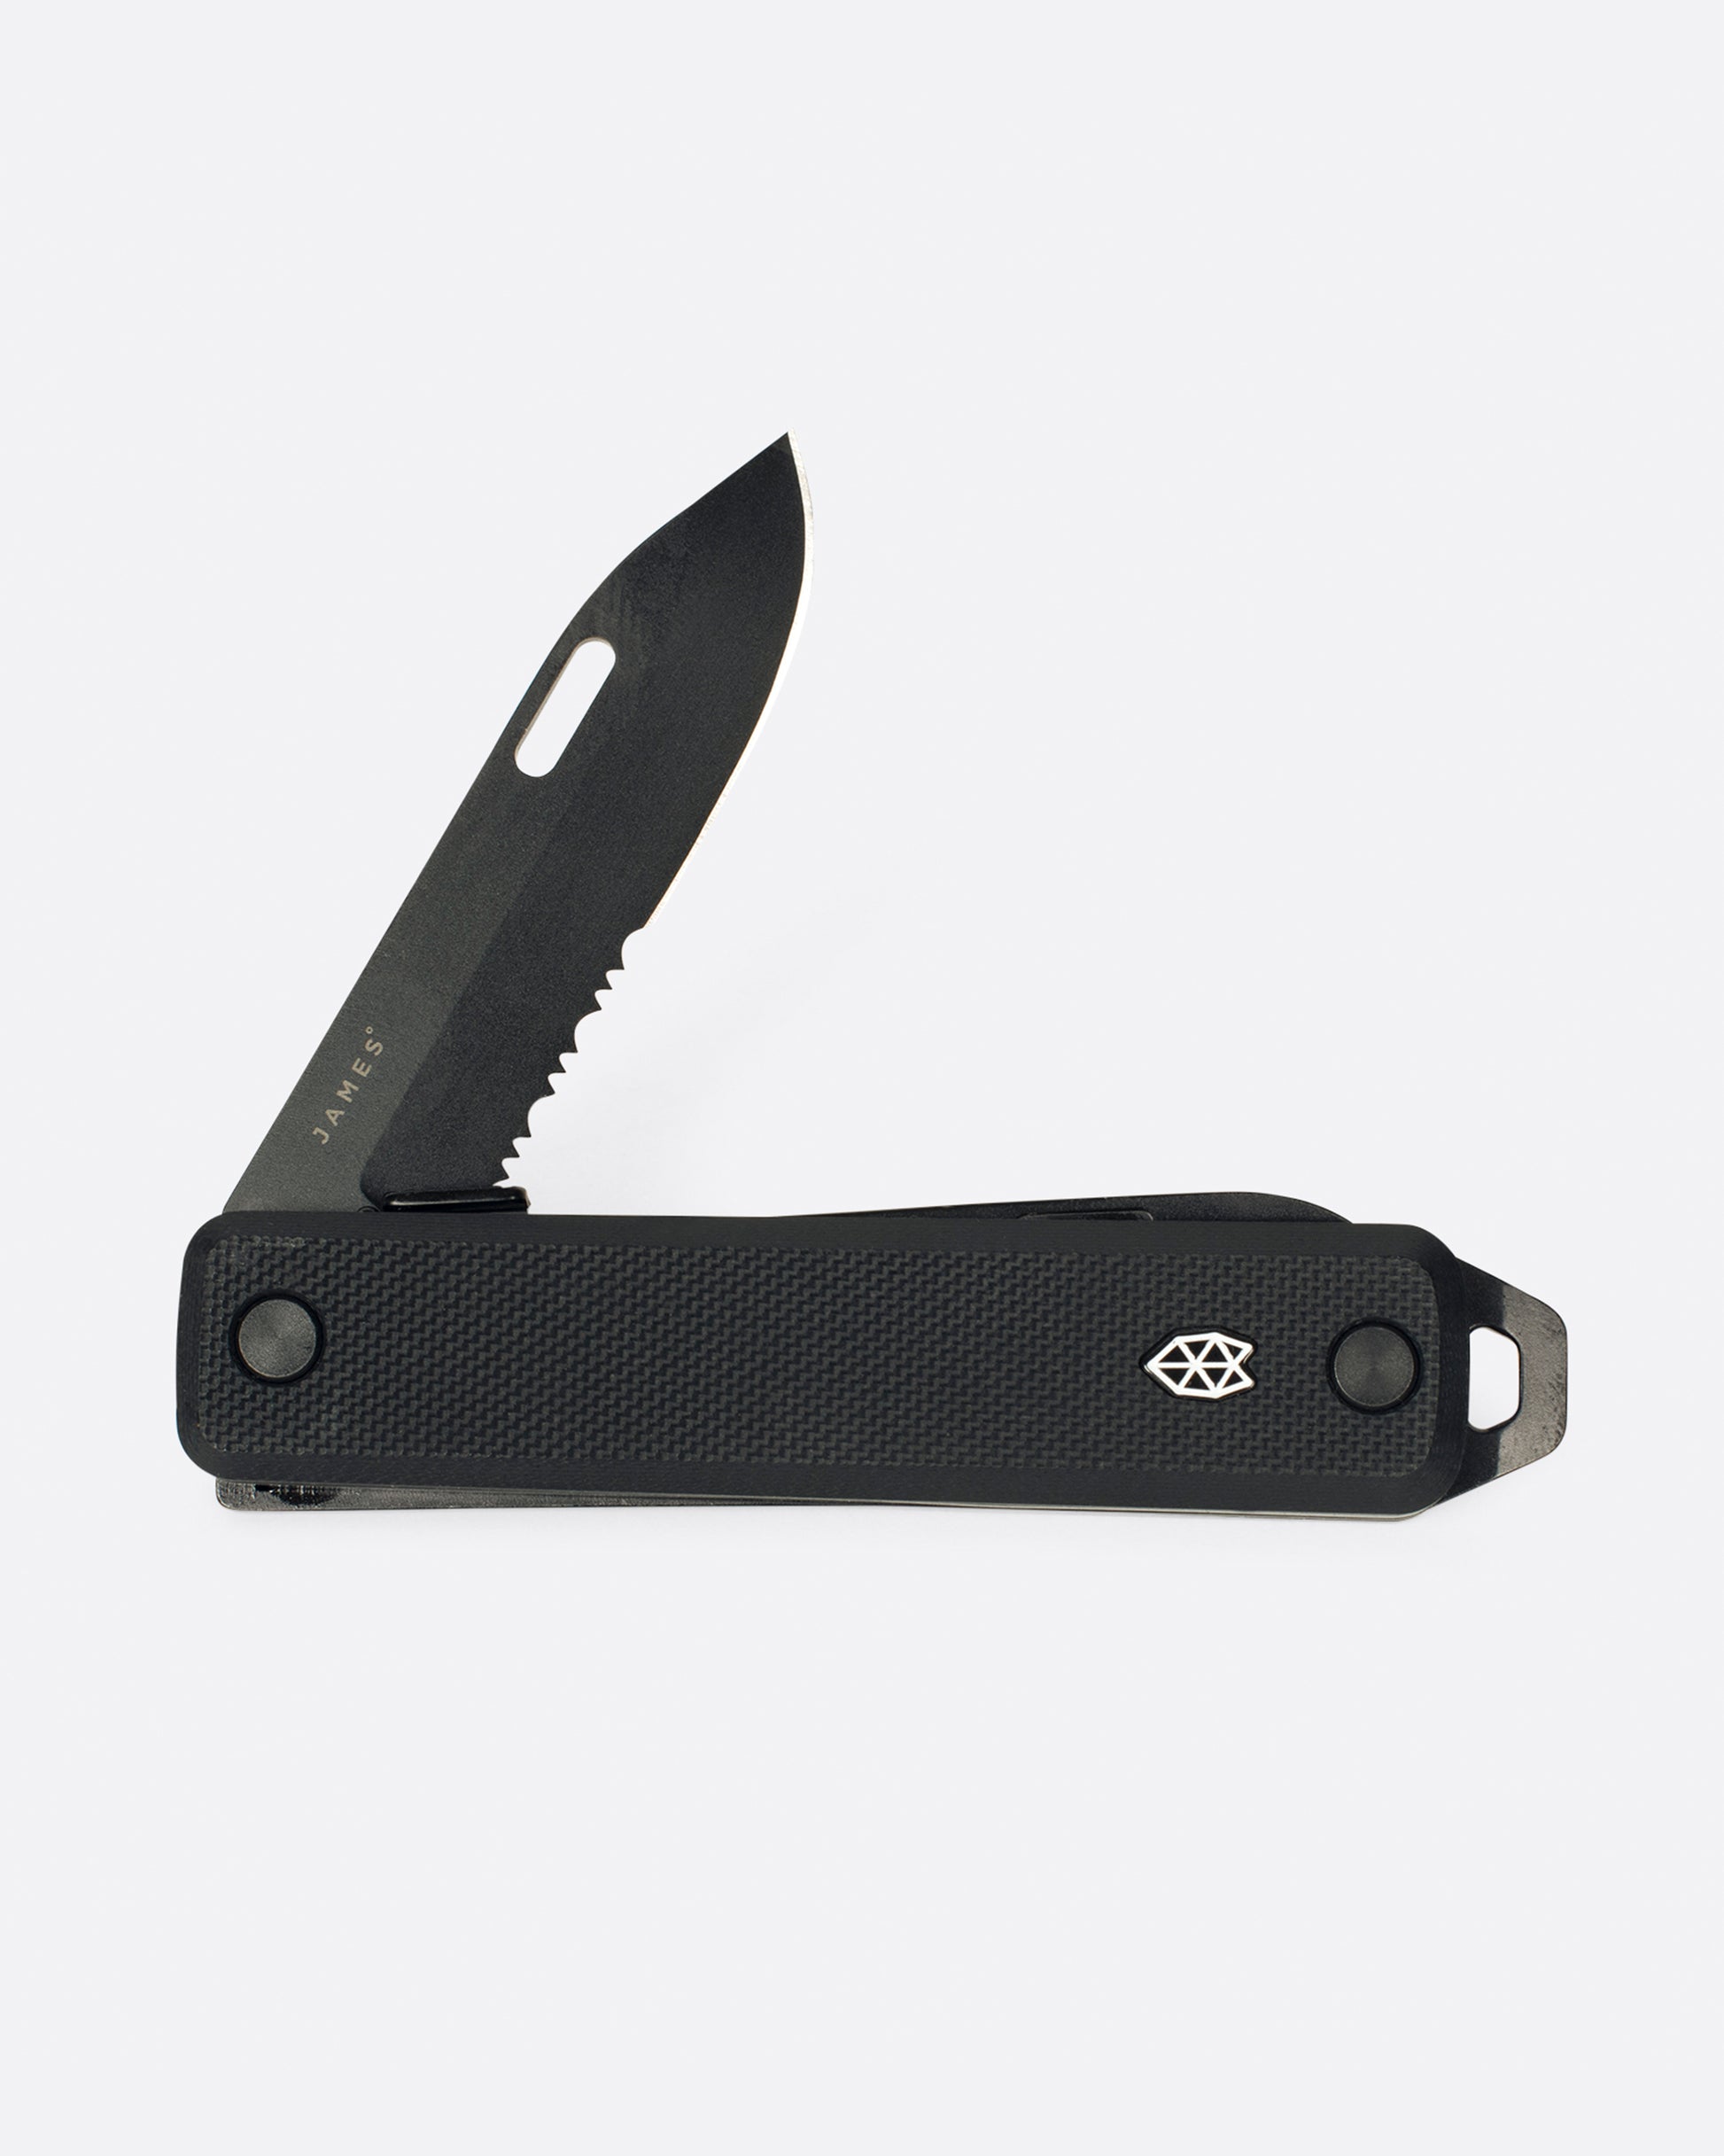 An all black pocket knife with a scissor attachment, shown open.